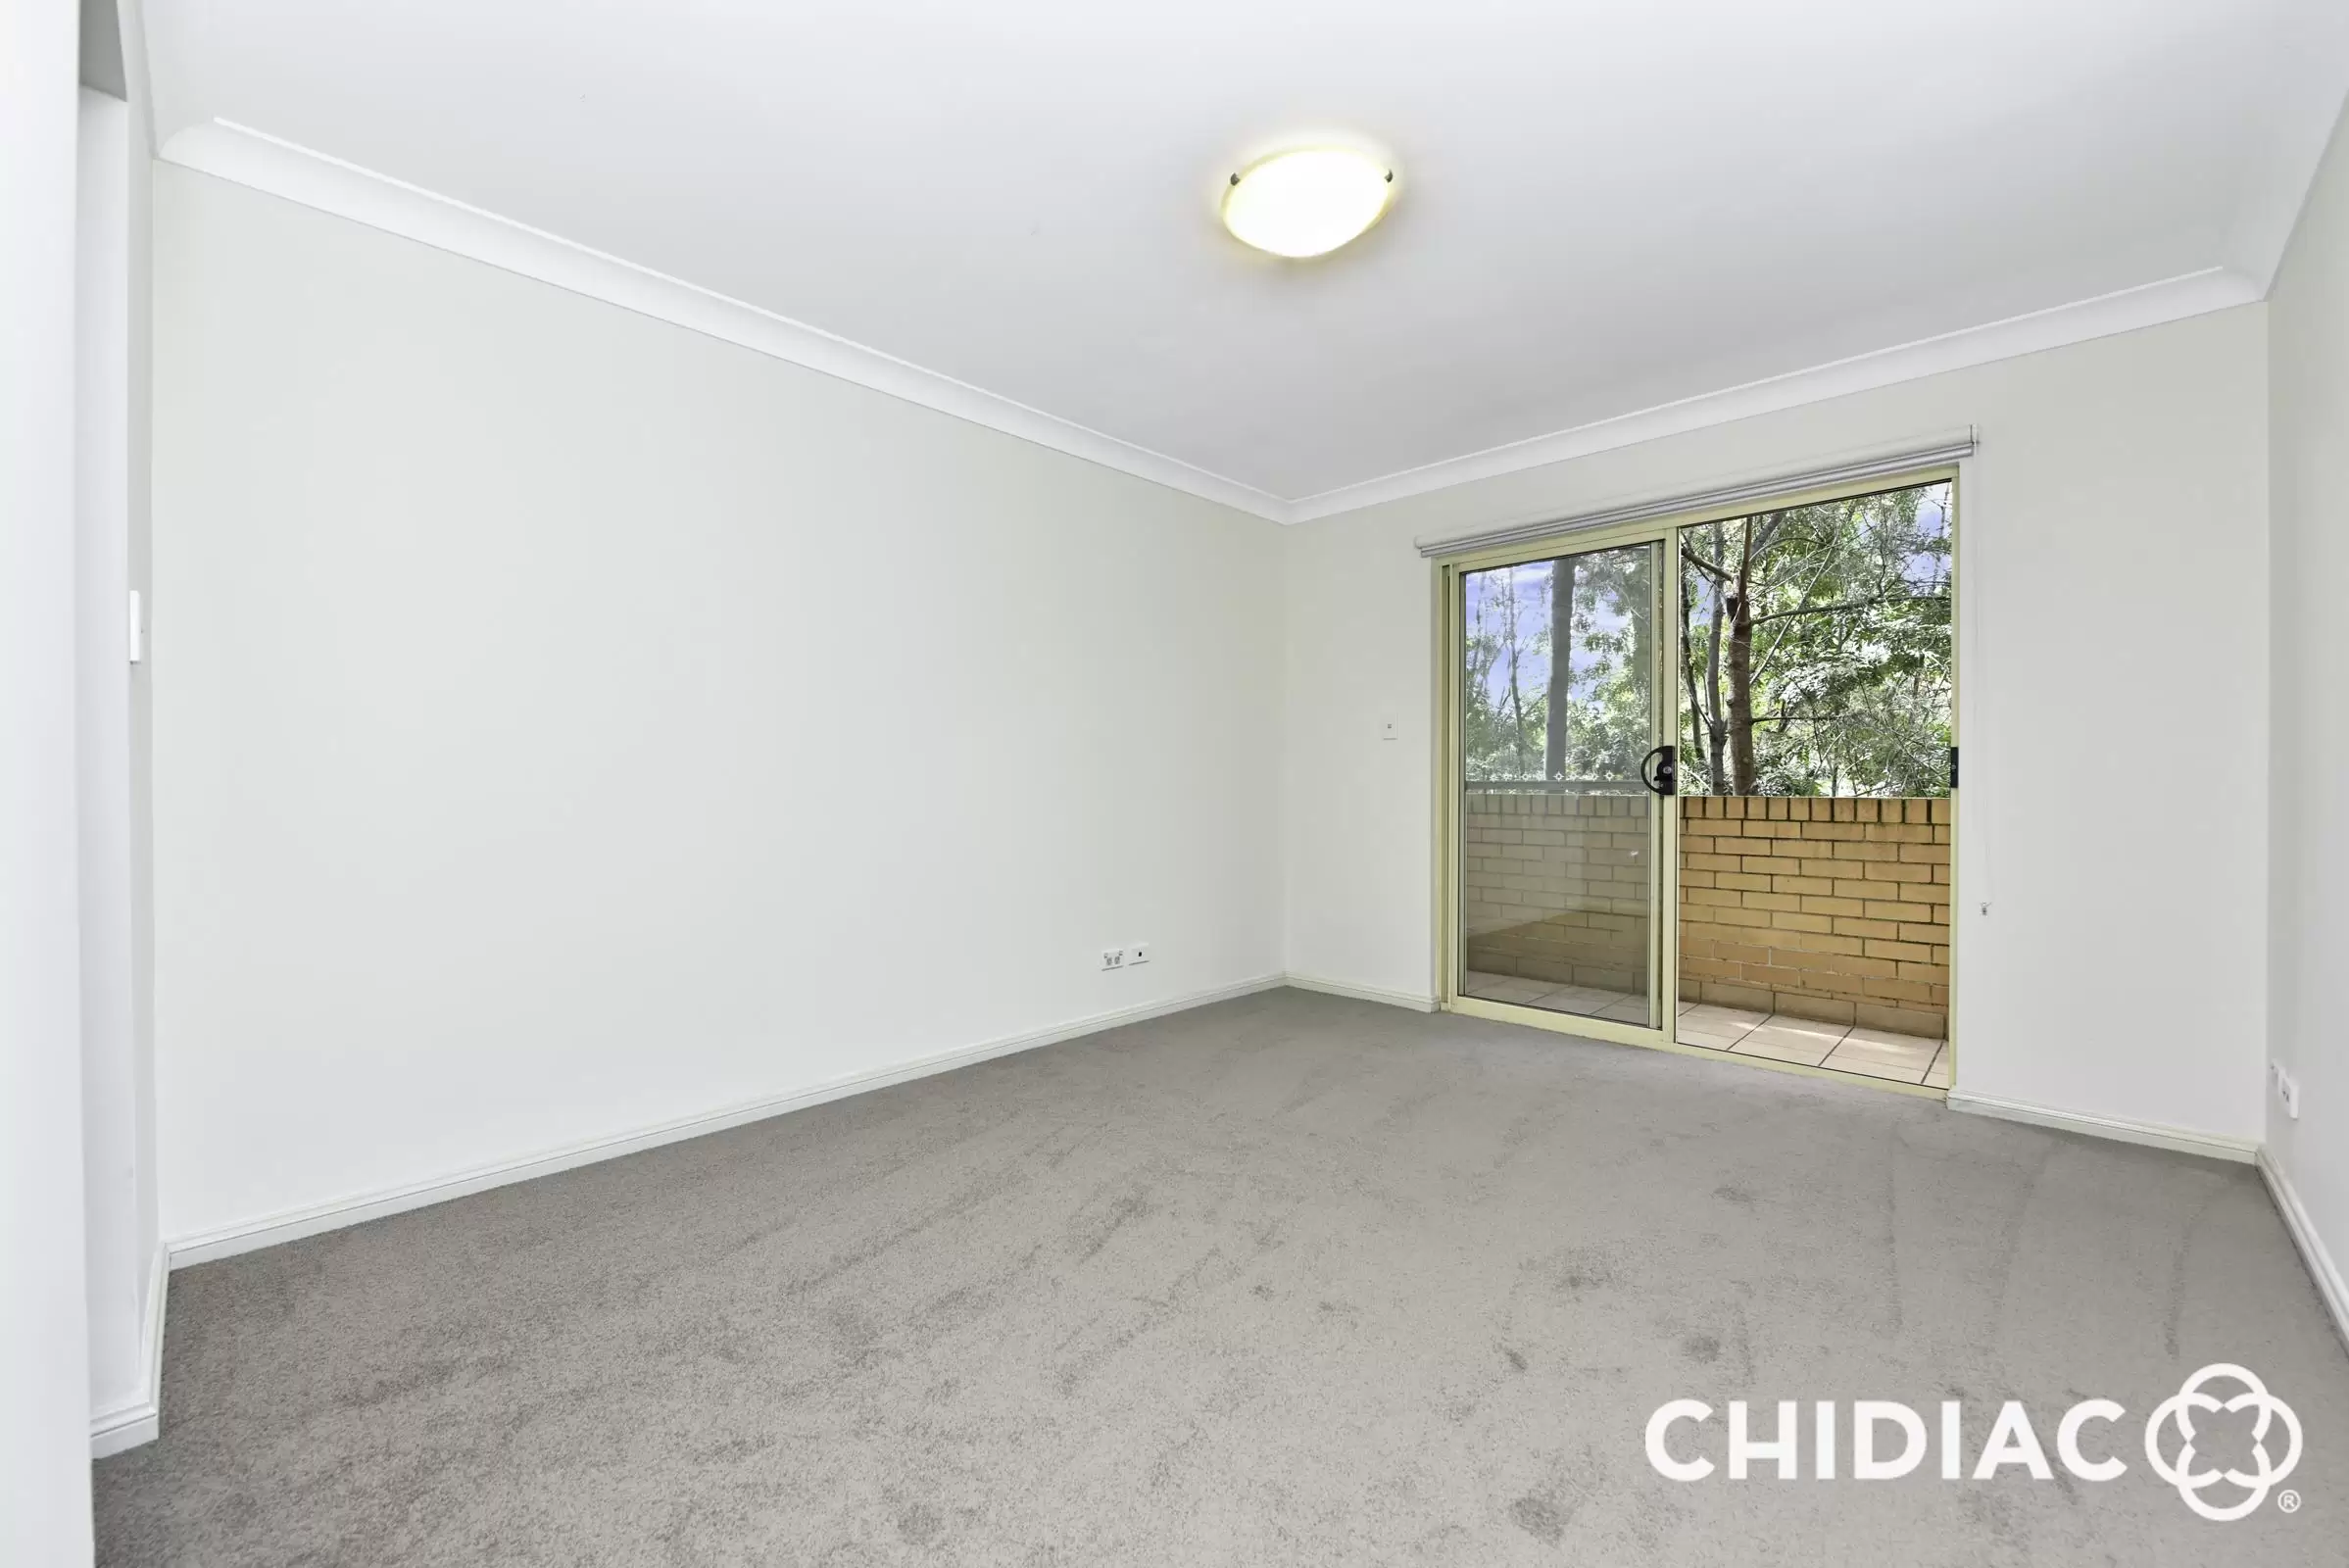 24/1 Bradley Place, Liberty Grove Leased by Chidiac Realty - image 4